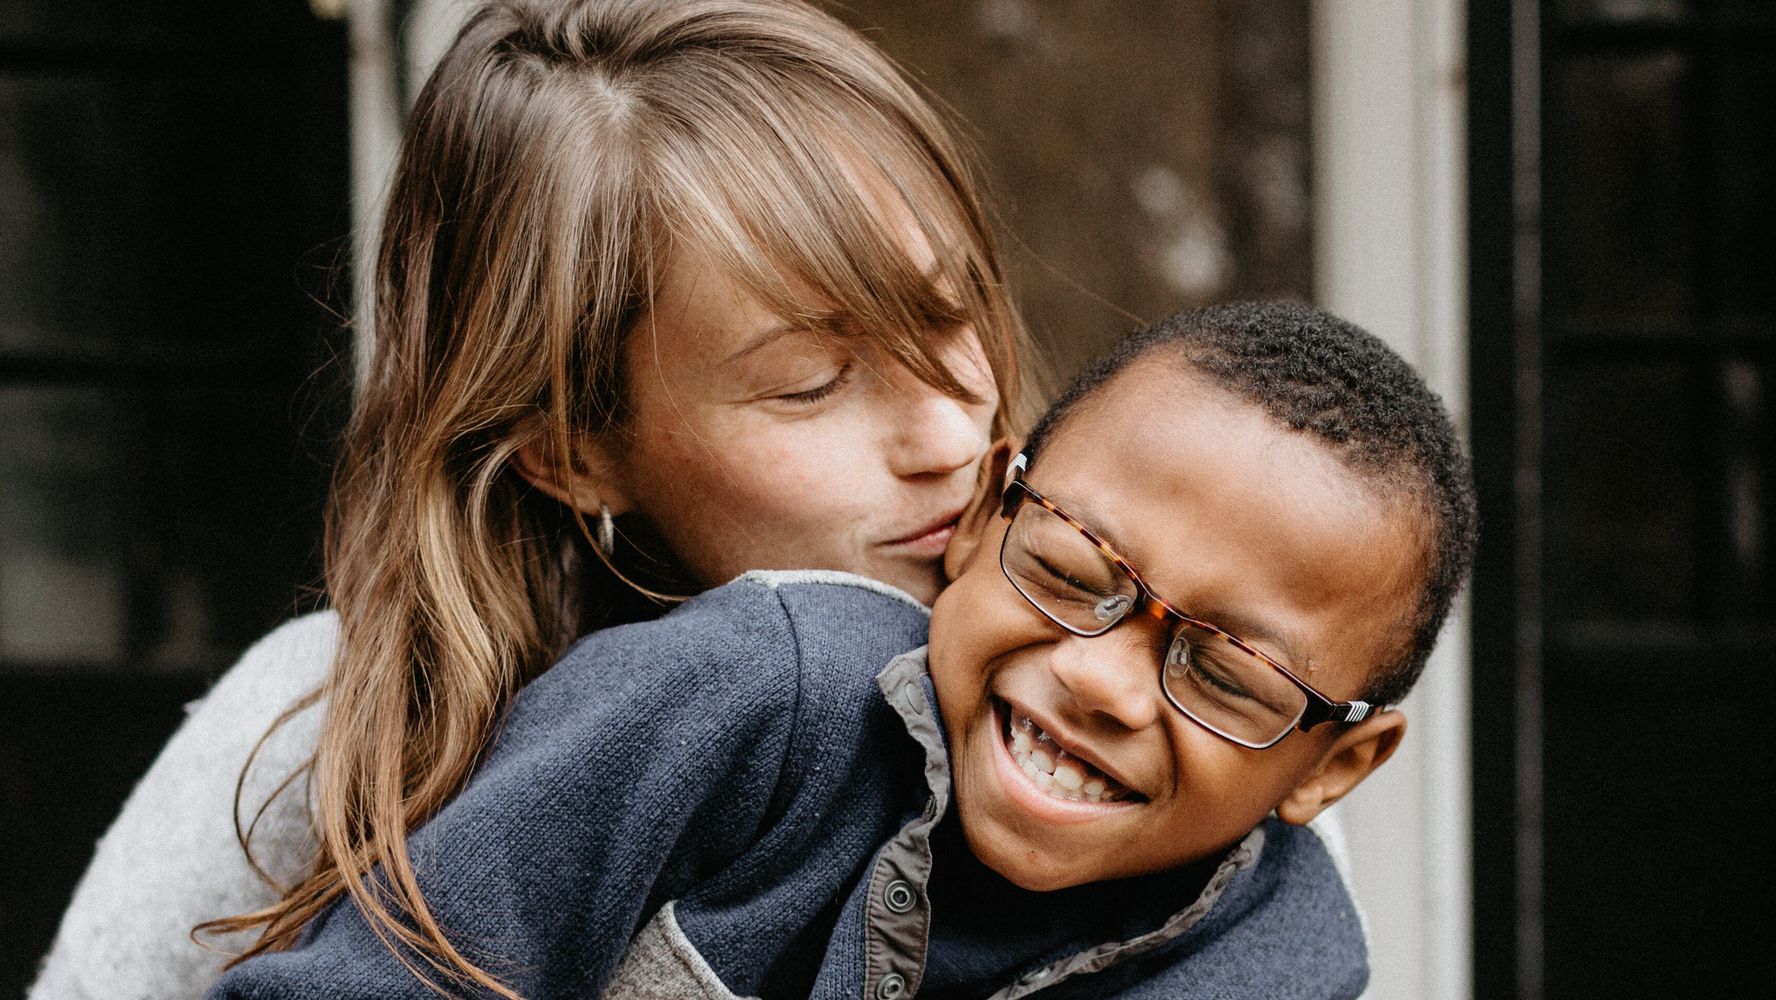 How To Actually Be More Present With Your Kids